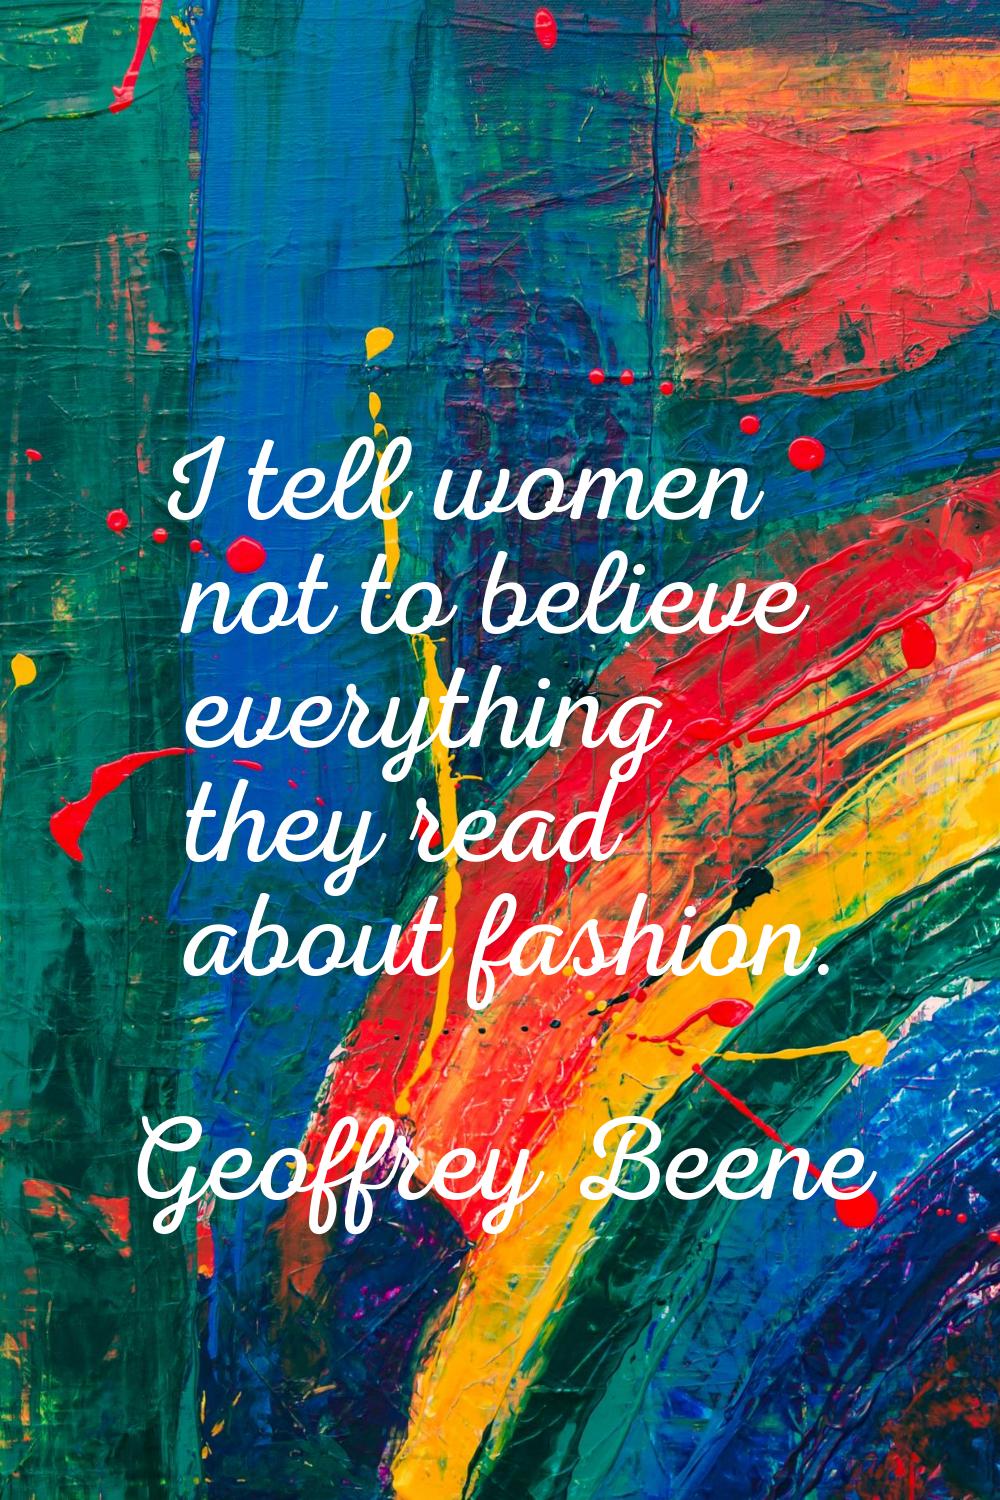 I tell women not to believe everything they read about fashion.